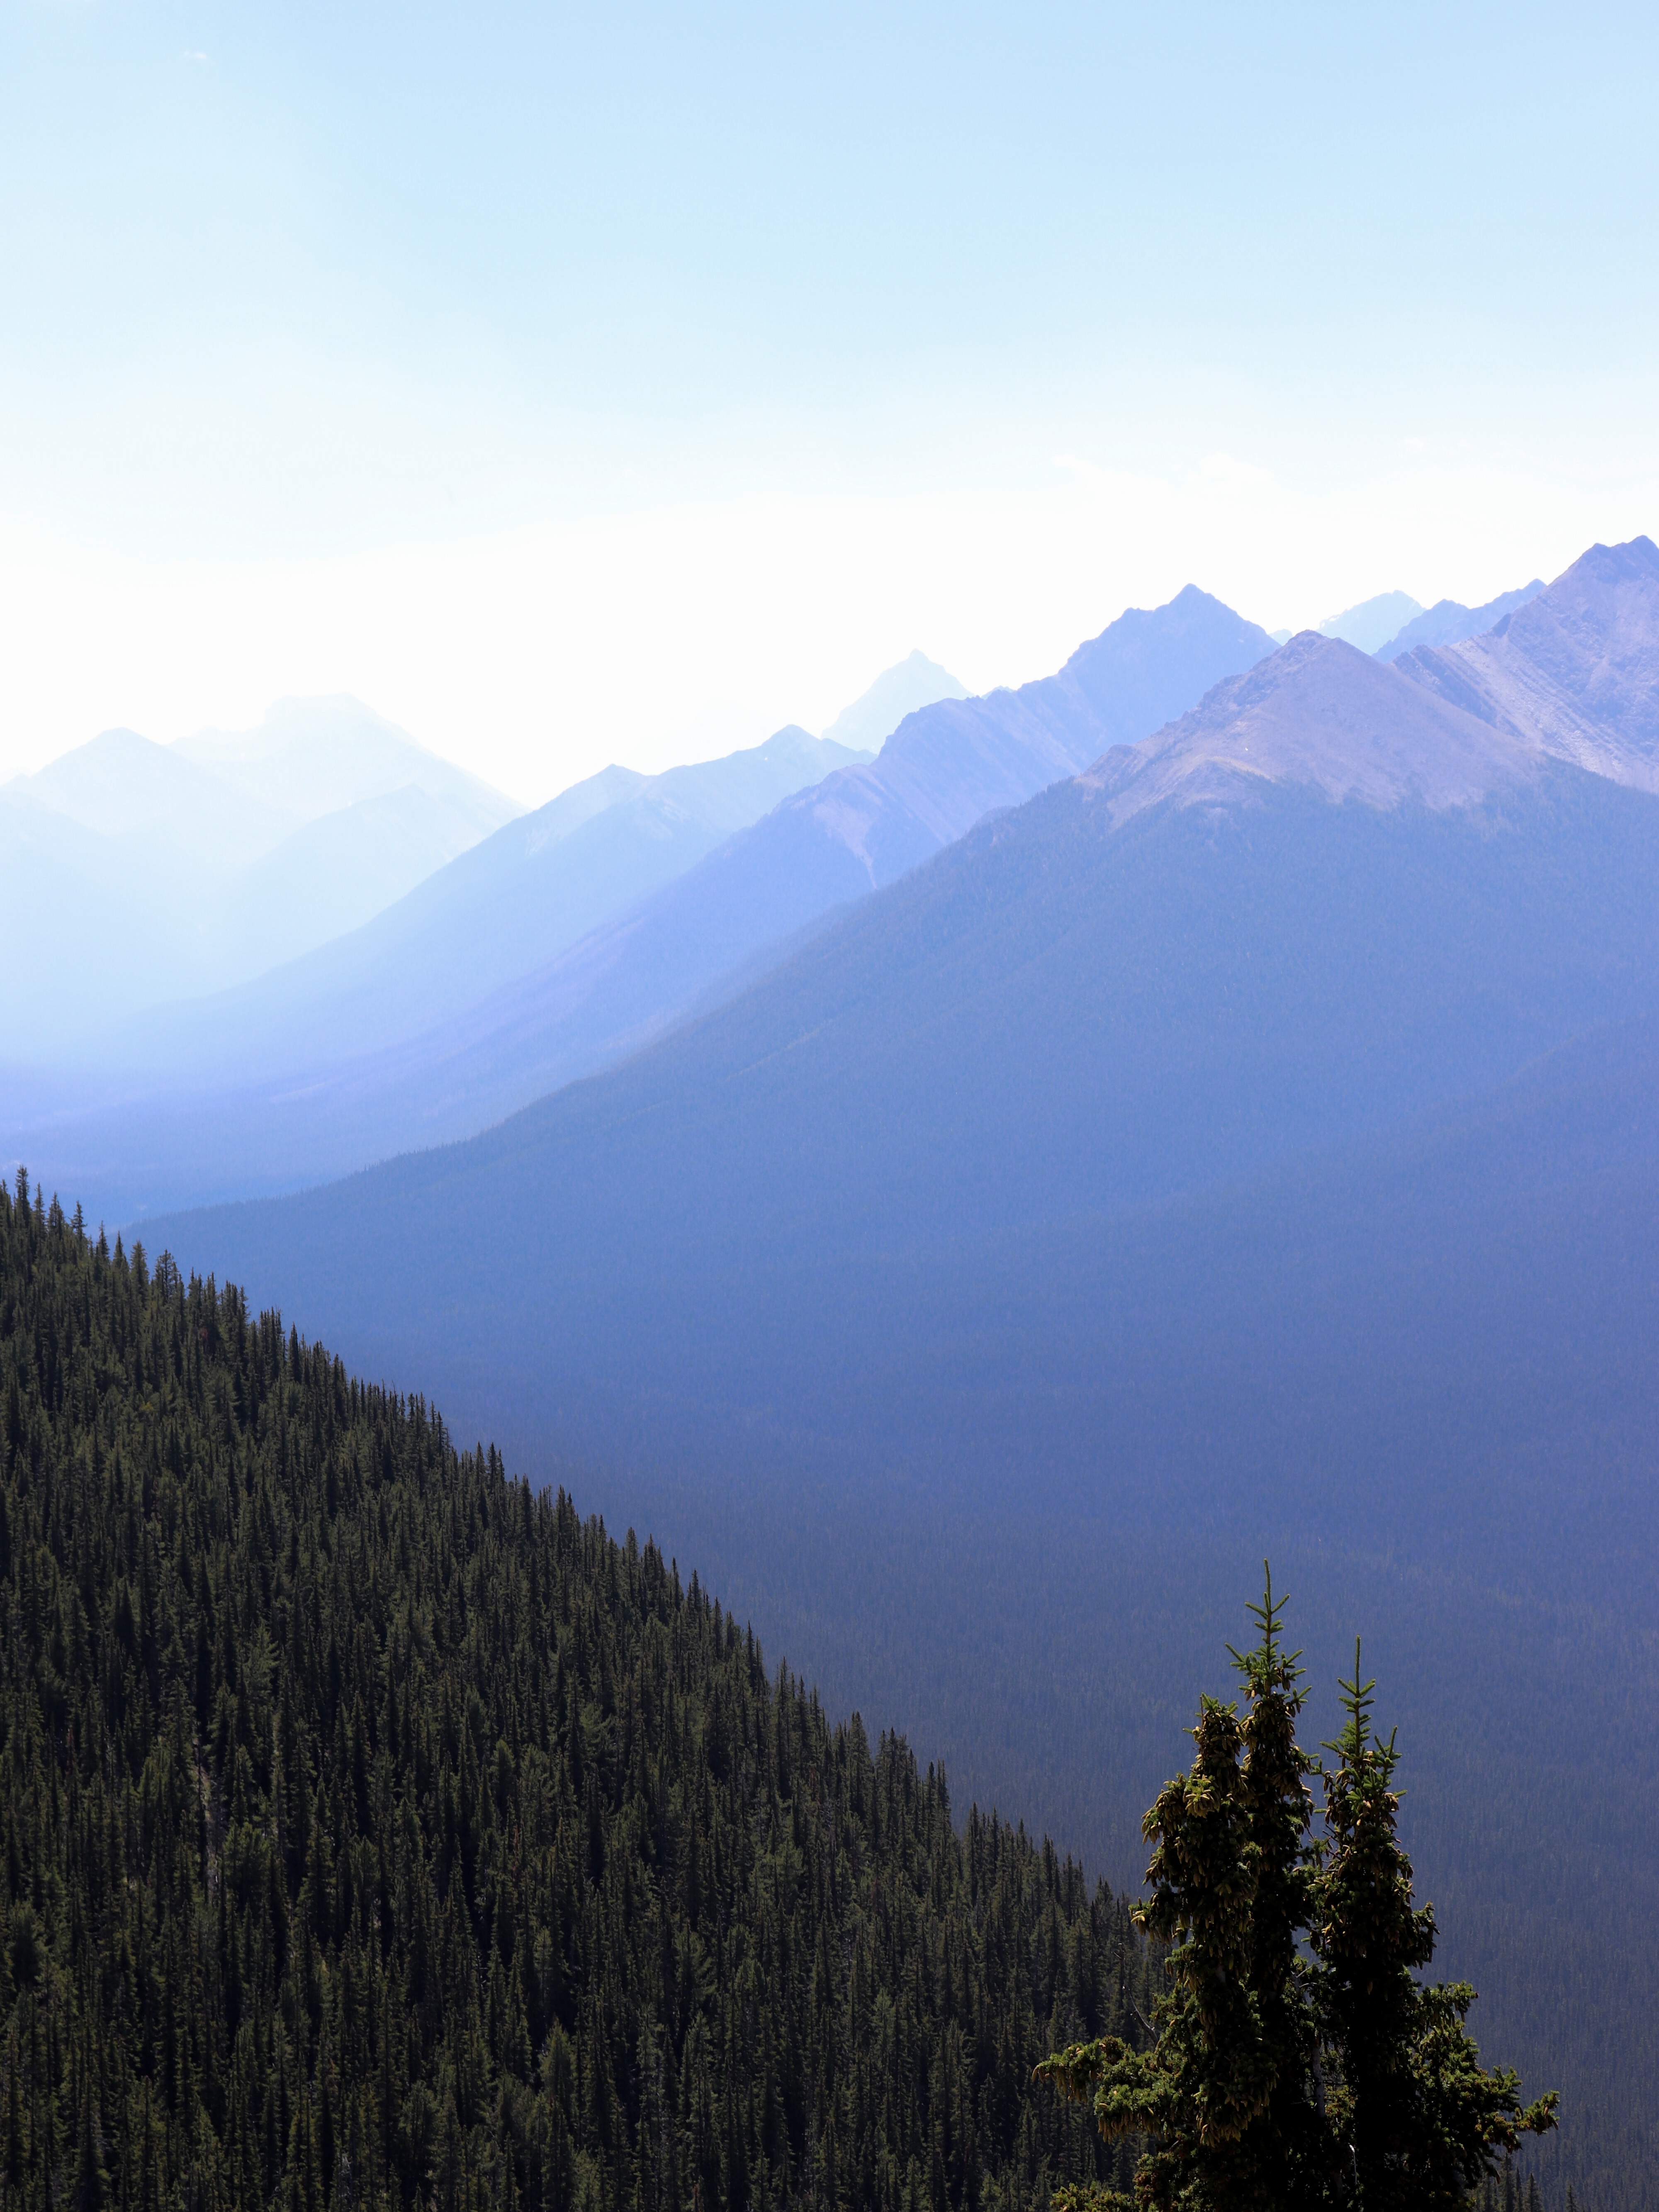 Rockies, wildfires, smoke, slopes, pines, firs, Banff National Park,